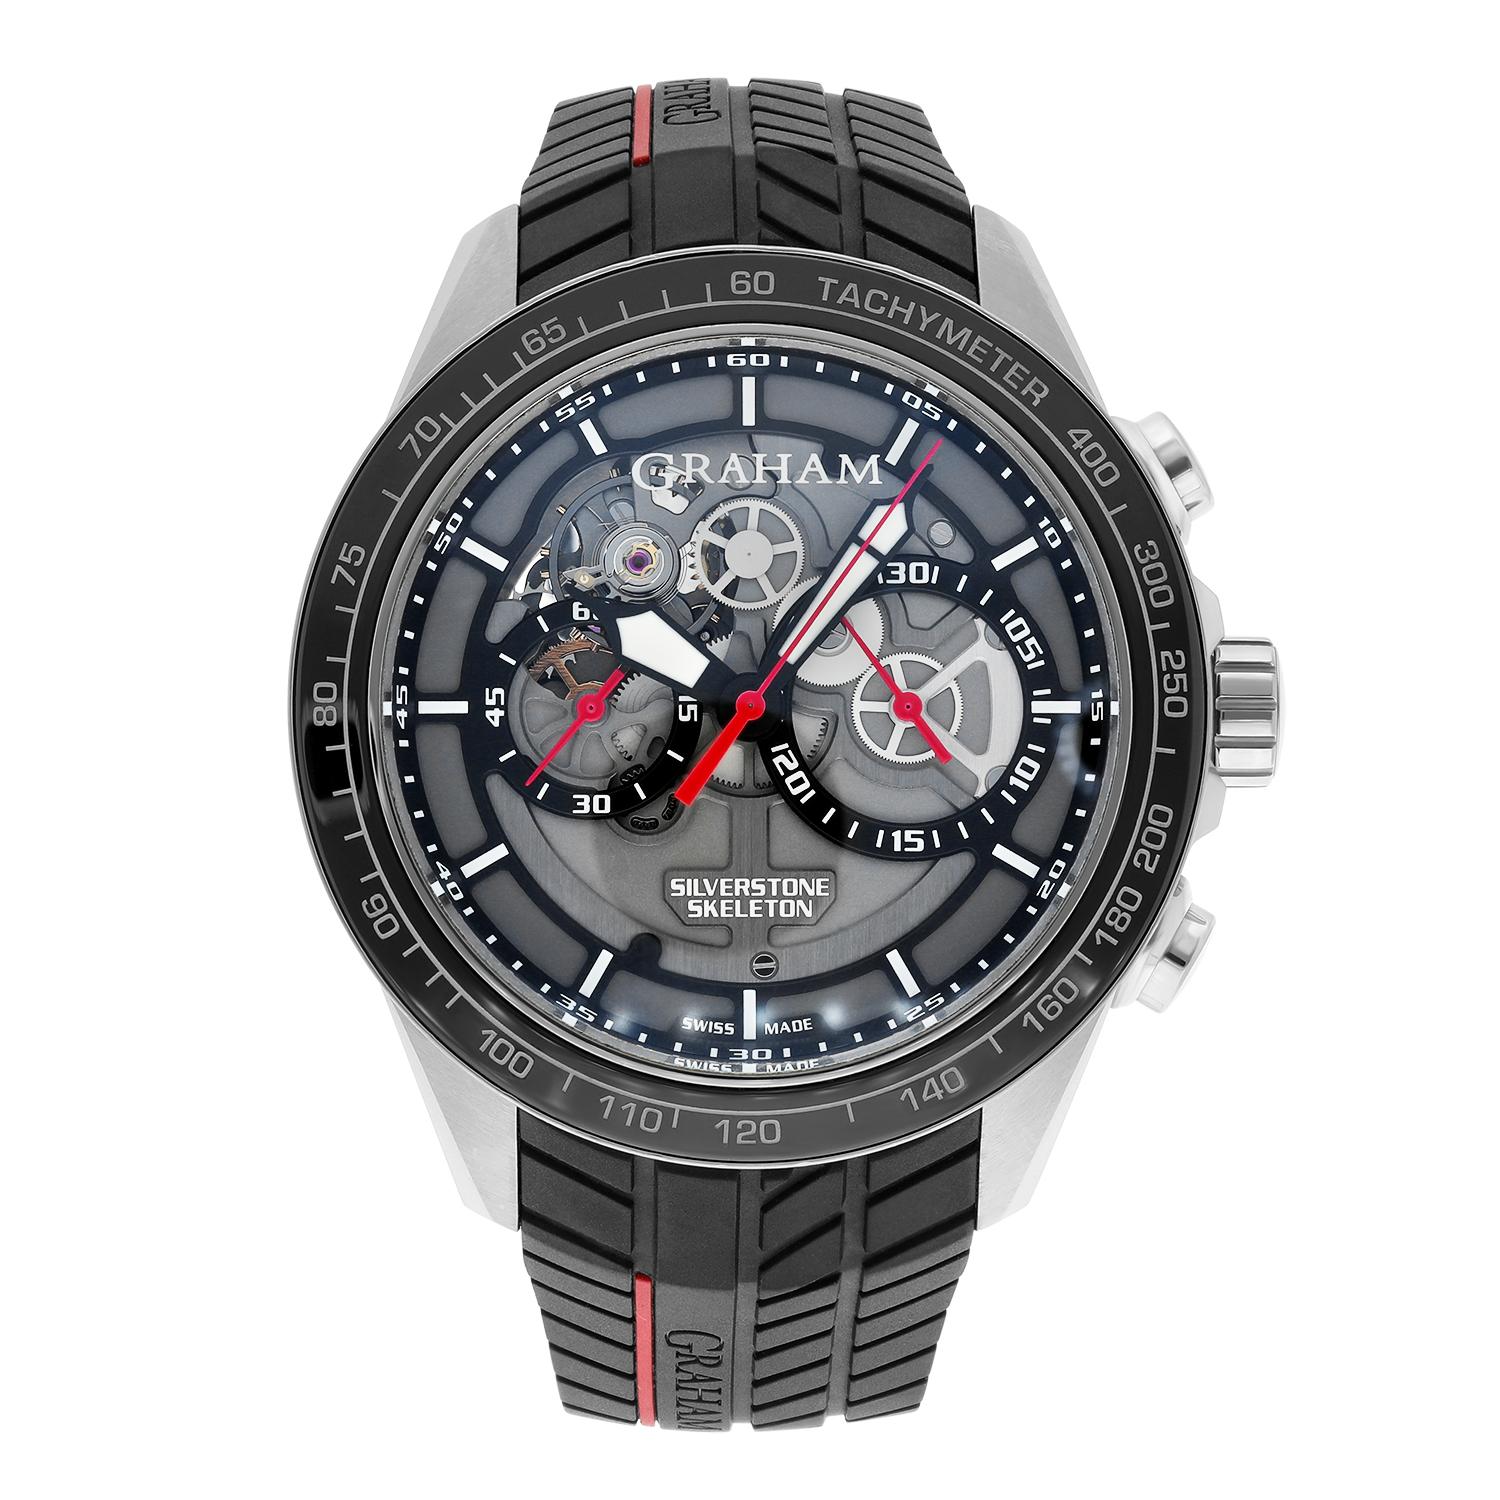 Introducing the Graham Silverstone RS Skeleton Red Automatic Men's Limited Edition Watch, a true masterpiece for any watch enthusiast. This timepiece boasts a stunning silver case with a polished finish and an exhibition caseback that showcases the